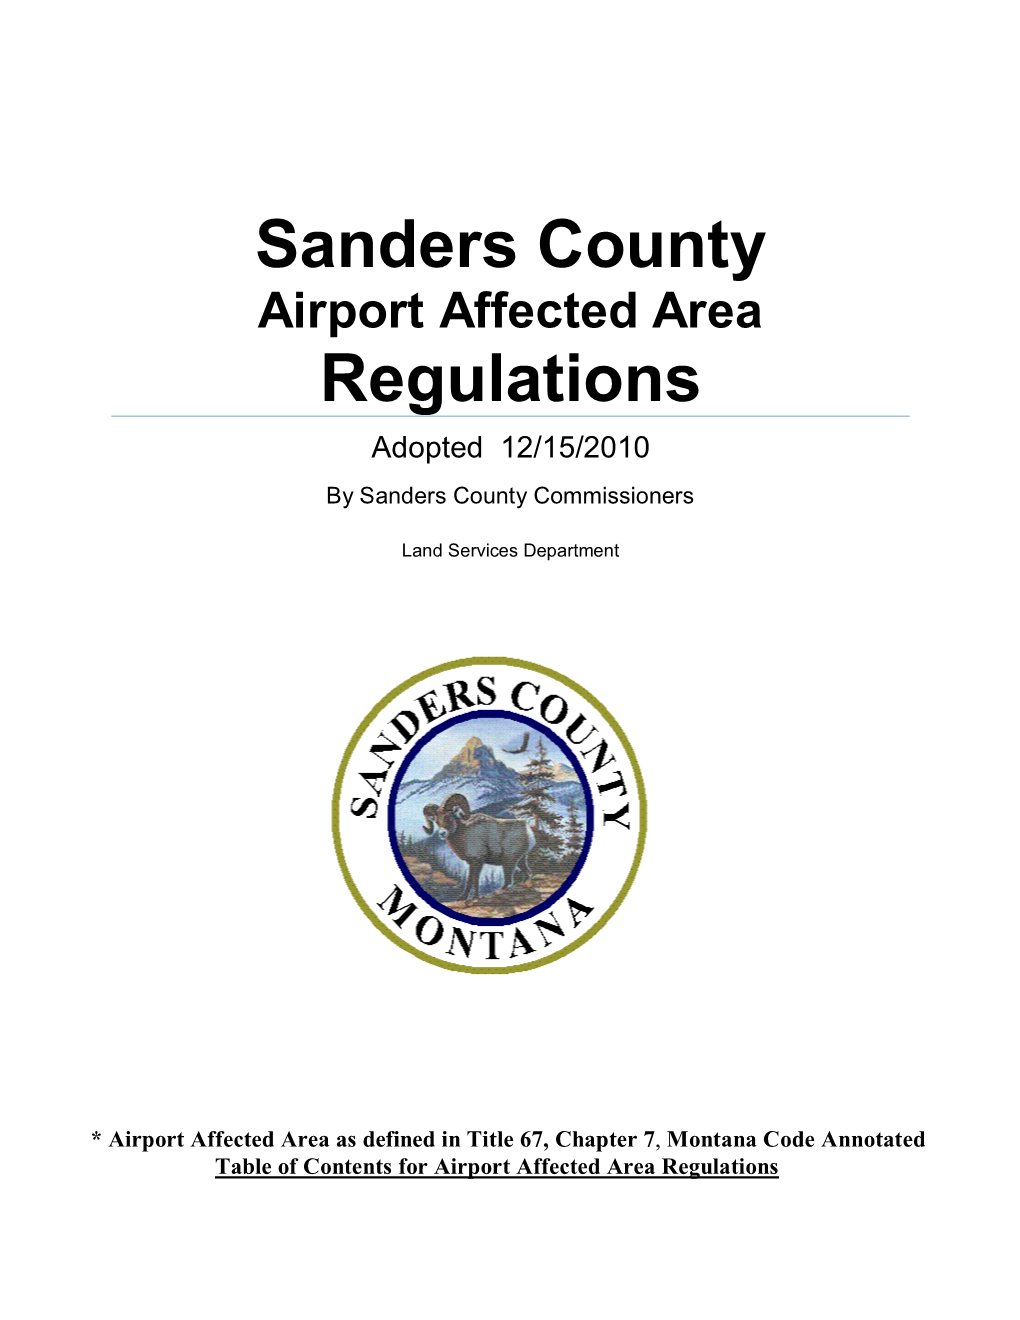 Airport Affected Area Regulations Adopted 12/15/2010